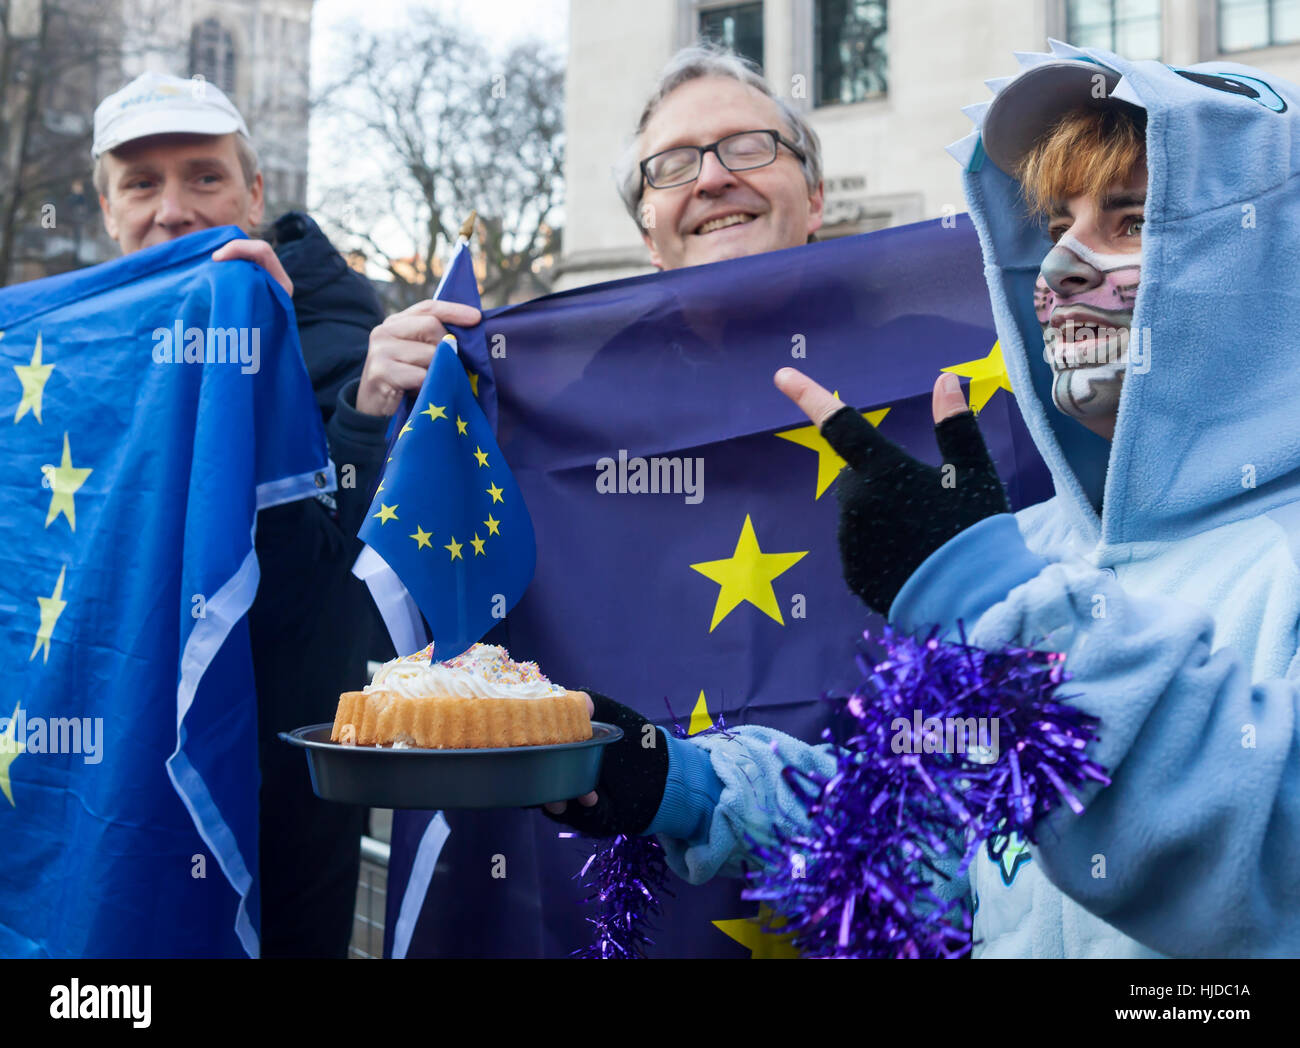 London, UK. 24th Jan, 2017. Verdict of the Supreme Court. The verdict of the Supreme Court was given today. A cake symbollising the deceit of the Leave campaign is presented. Credit: Jane Campbell/Alamy Live News Stock Photo